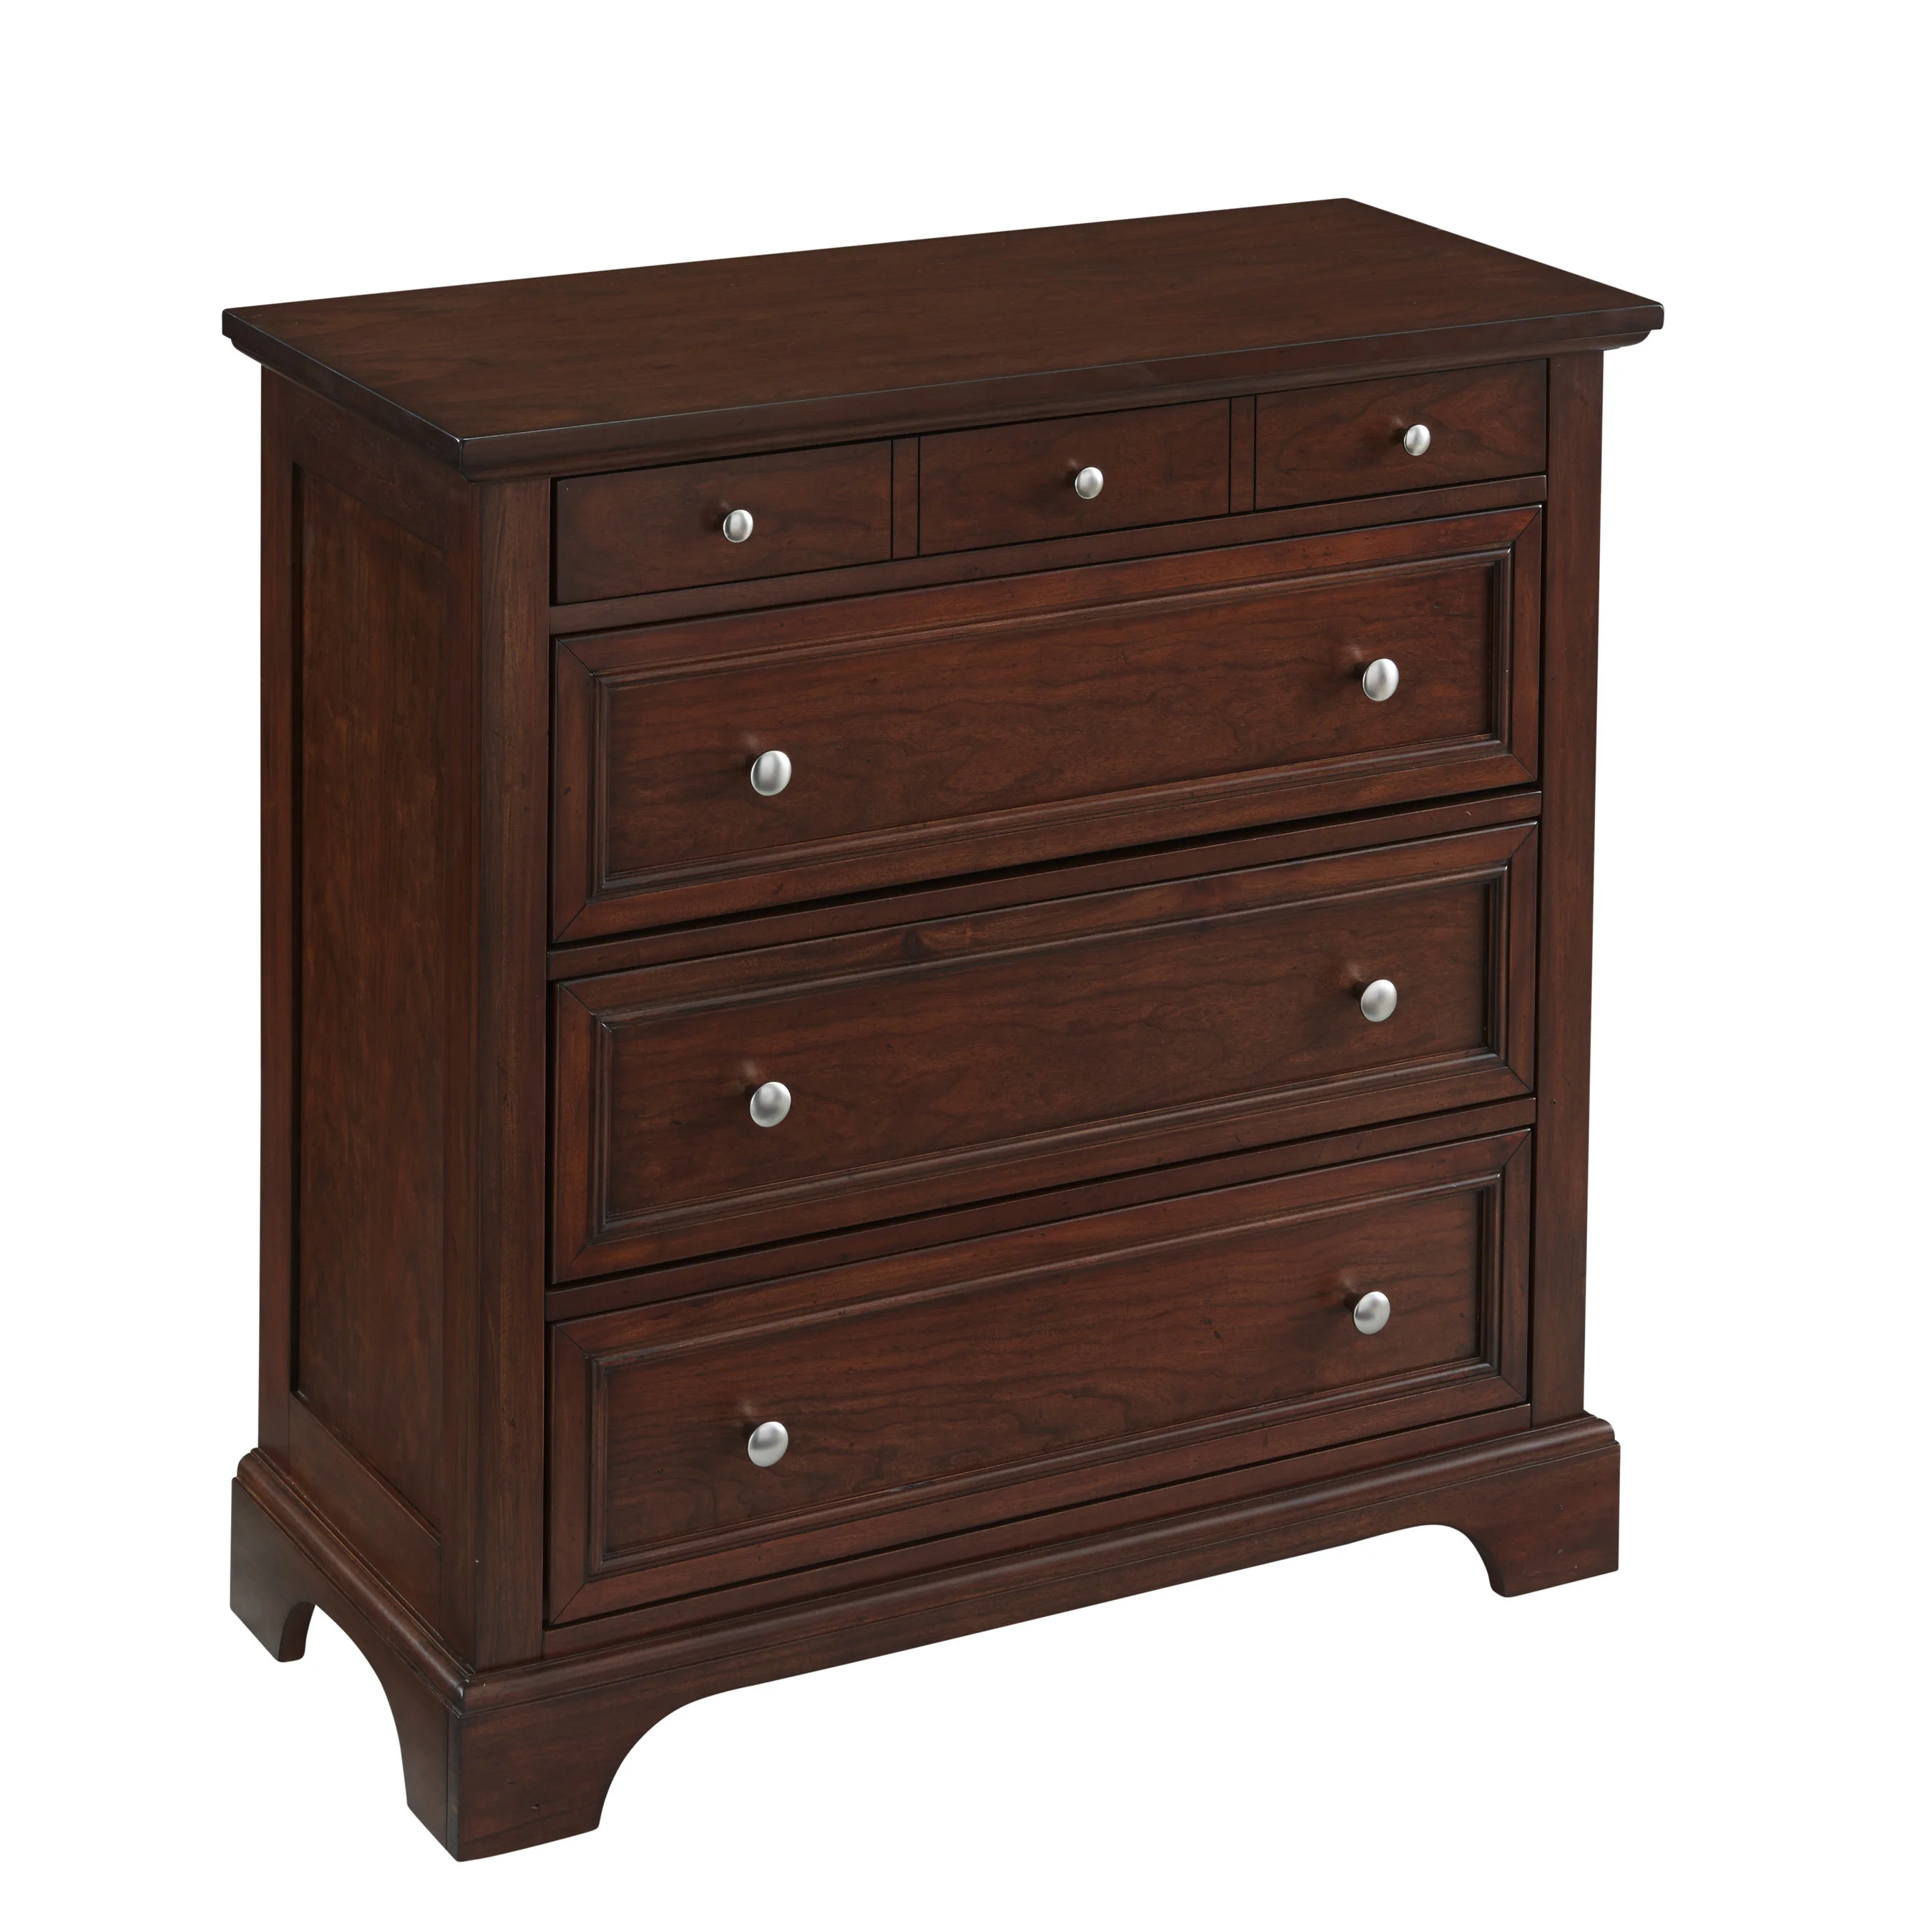 Chesapeake Drawer Chest by Home Styles